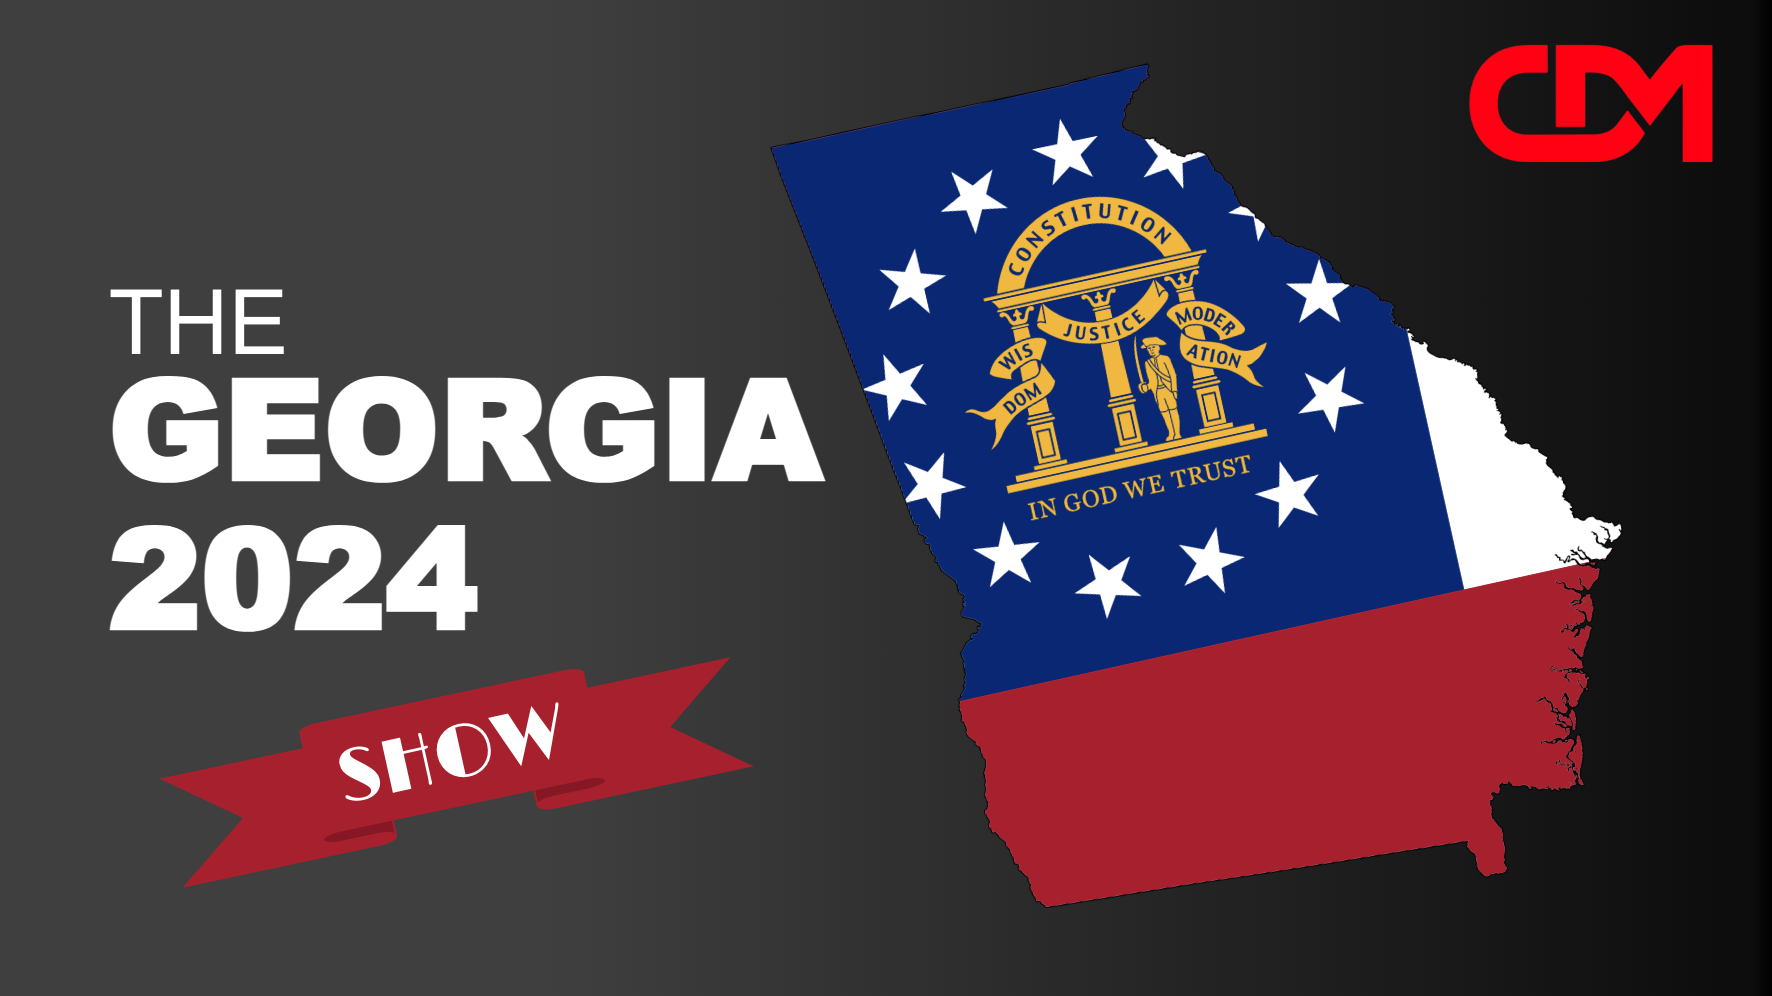 Join us at 7:00pm for the latest updates from Kandiss Taylor, Fulton County update from Stephanie Endres, Legislative perspectives from Amy Kremer and Forsyth GOP with Mendy Moore